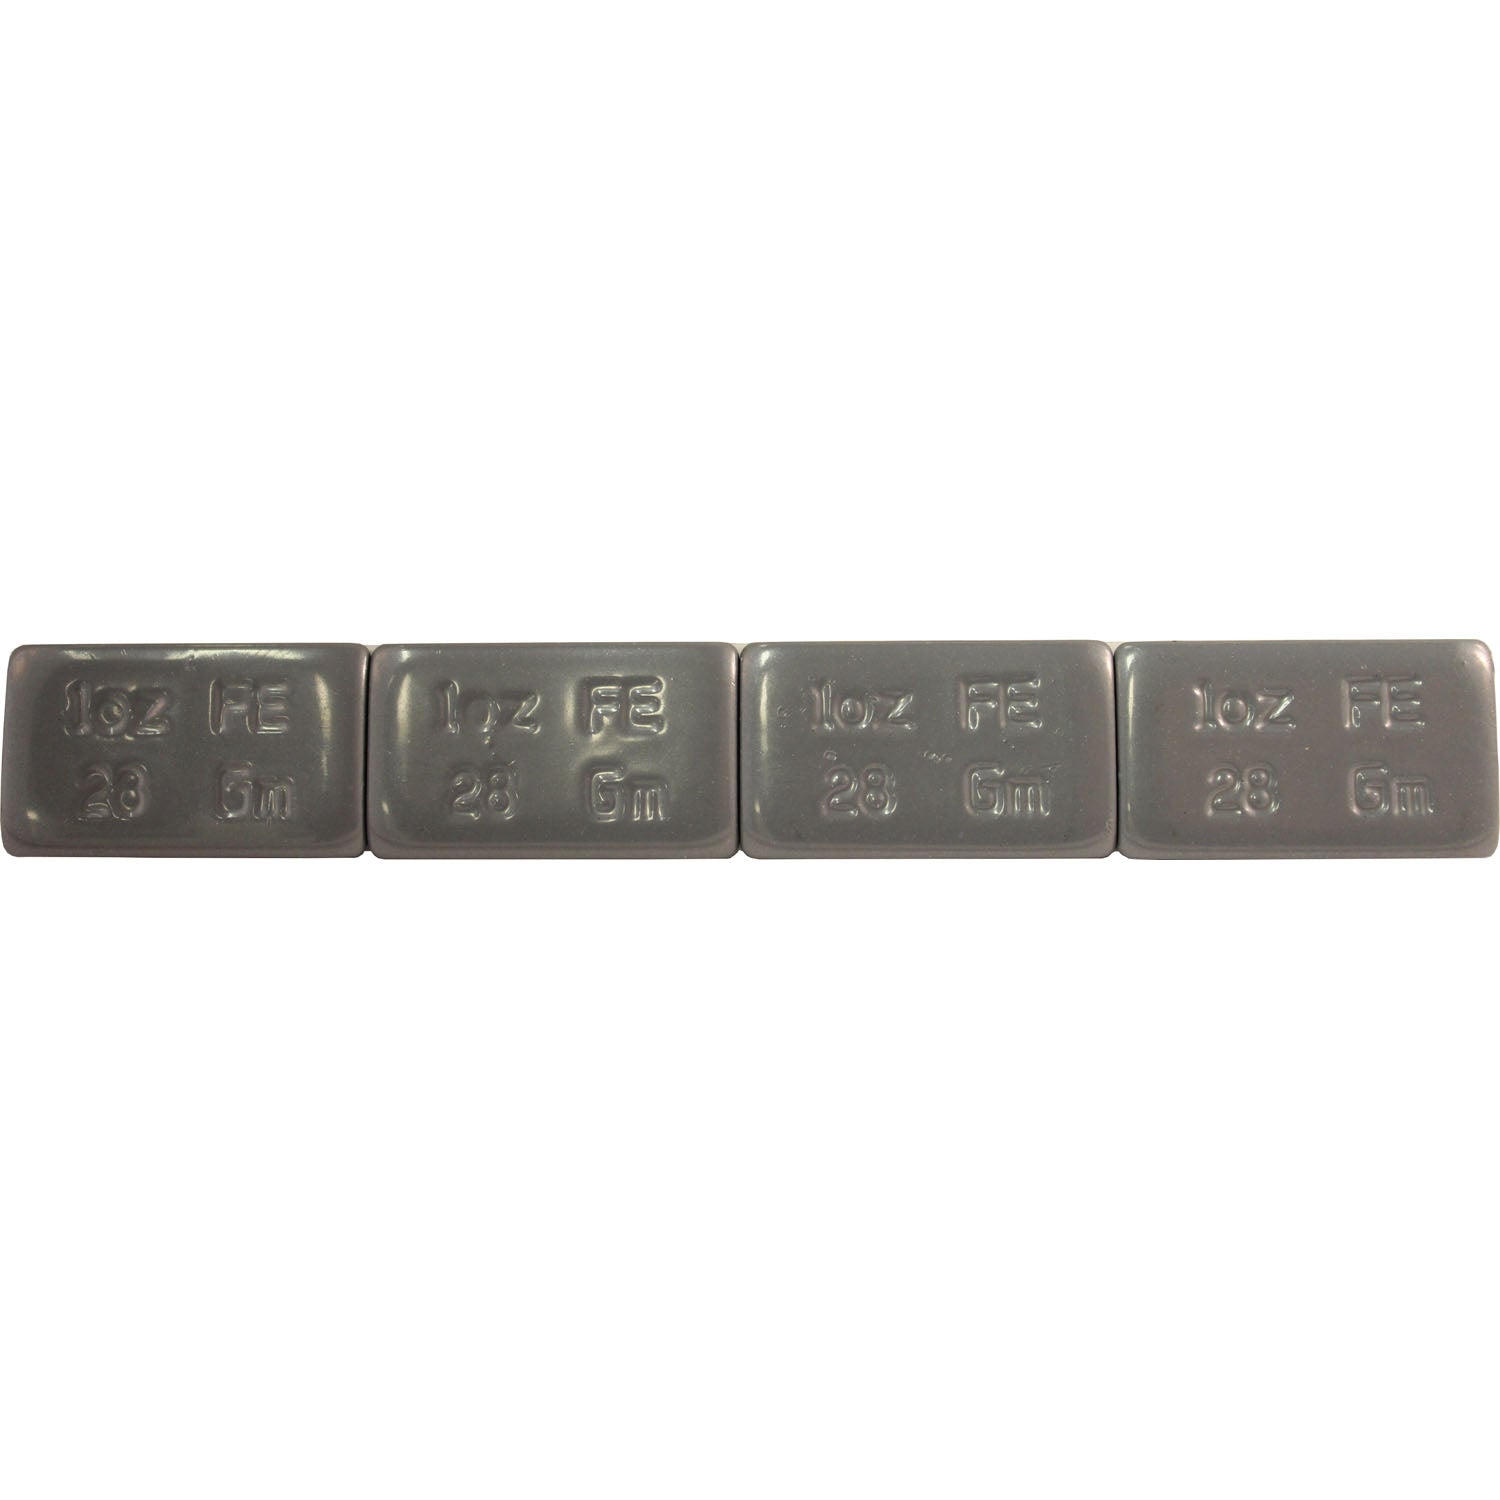 Ascot 484-16001 Wide Steel Adhesive Wheel Weights 1 oz. 3/4" - 72 Pieces